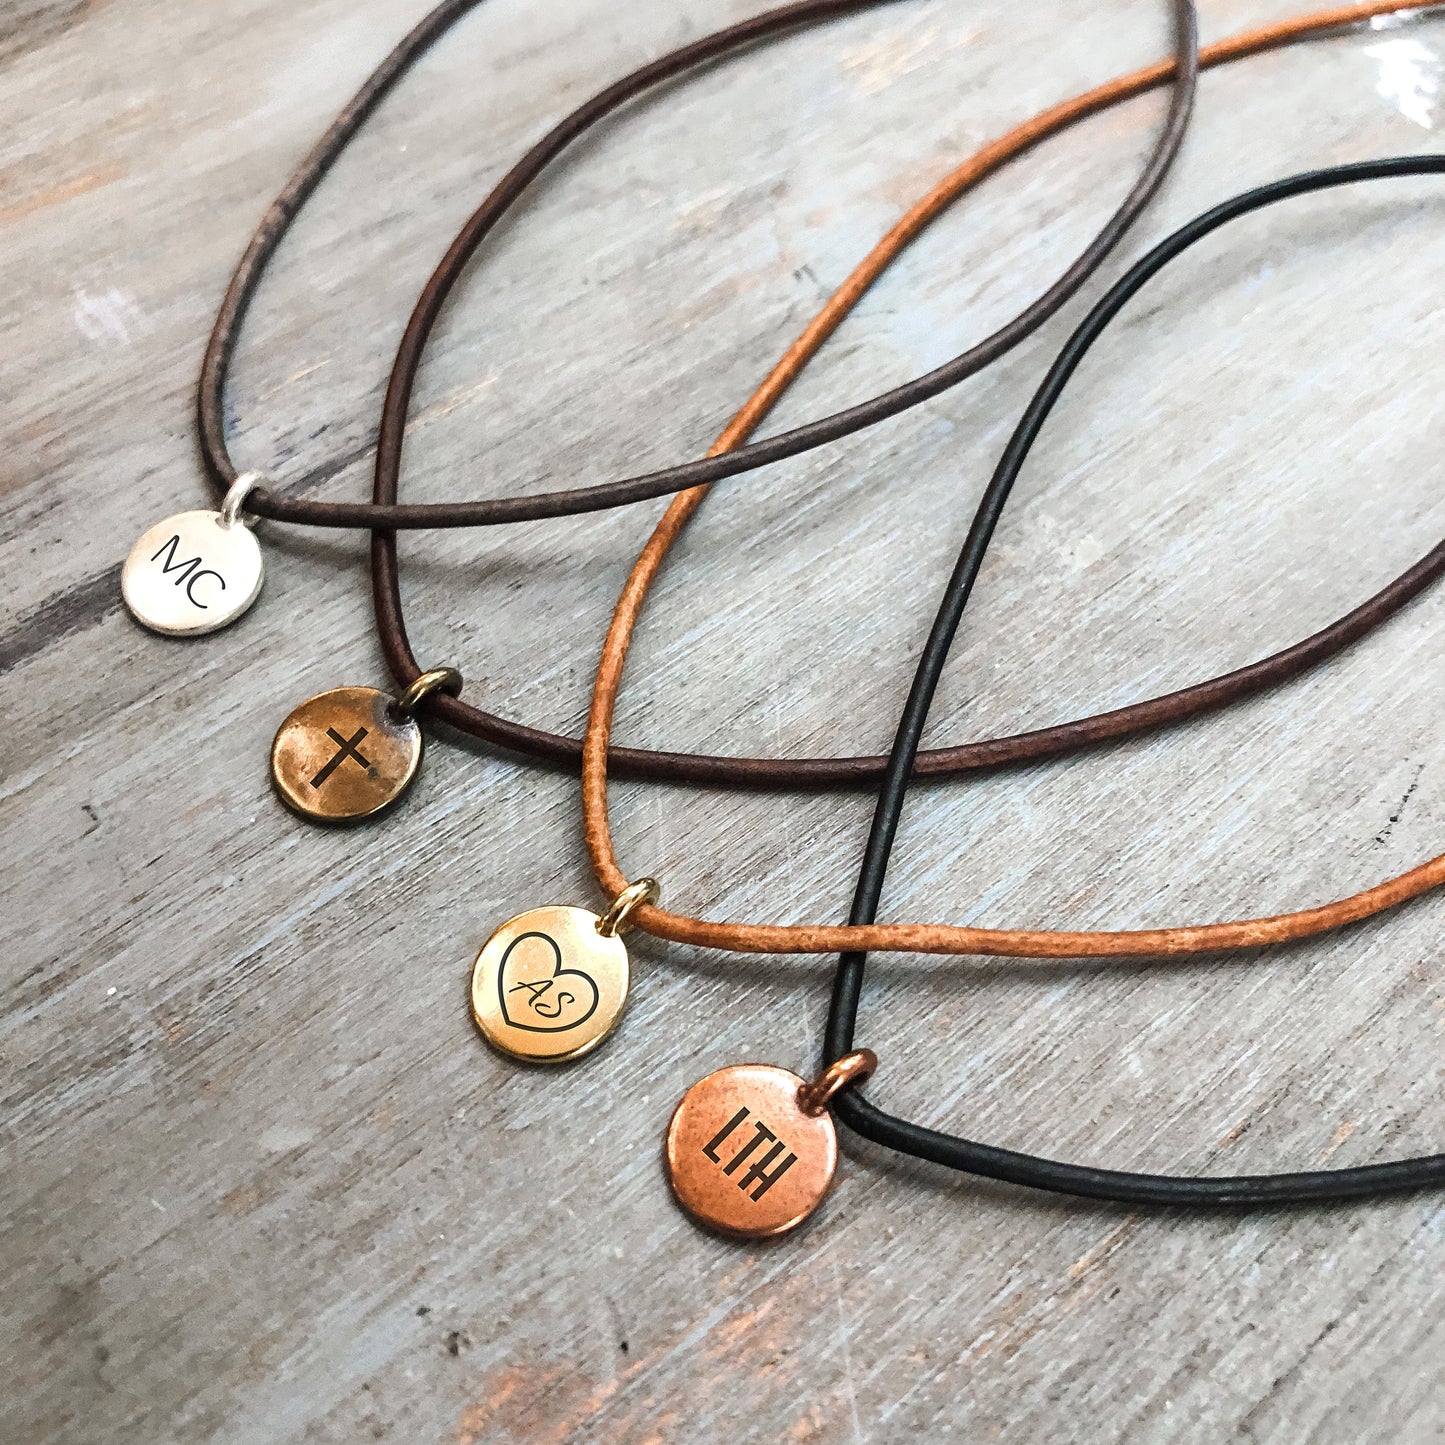 Engraved Pendant necklace for him and her | Leather cord necklace for women men | Boho leather necklace | Layering pendant necklace